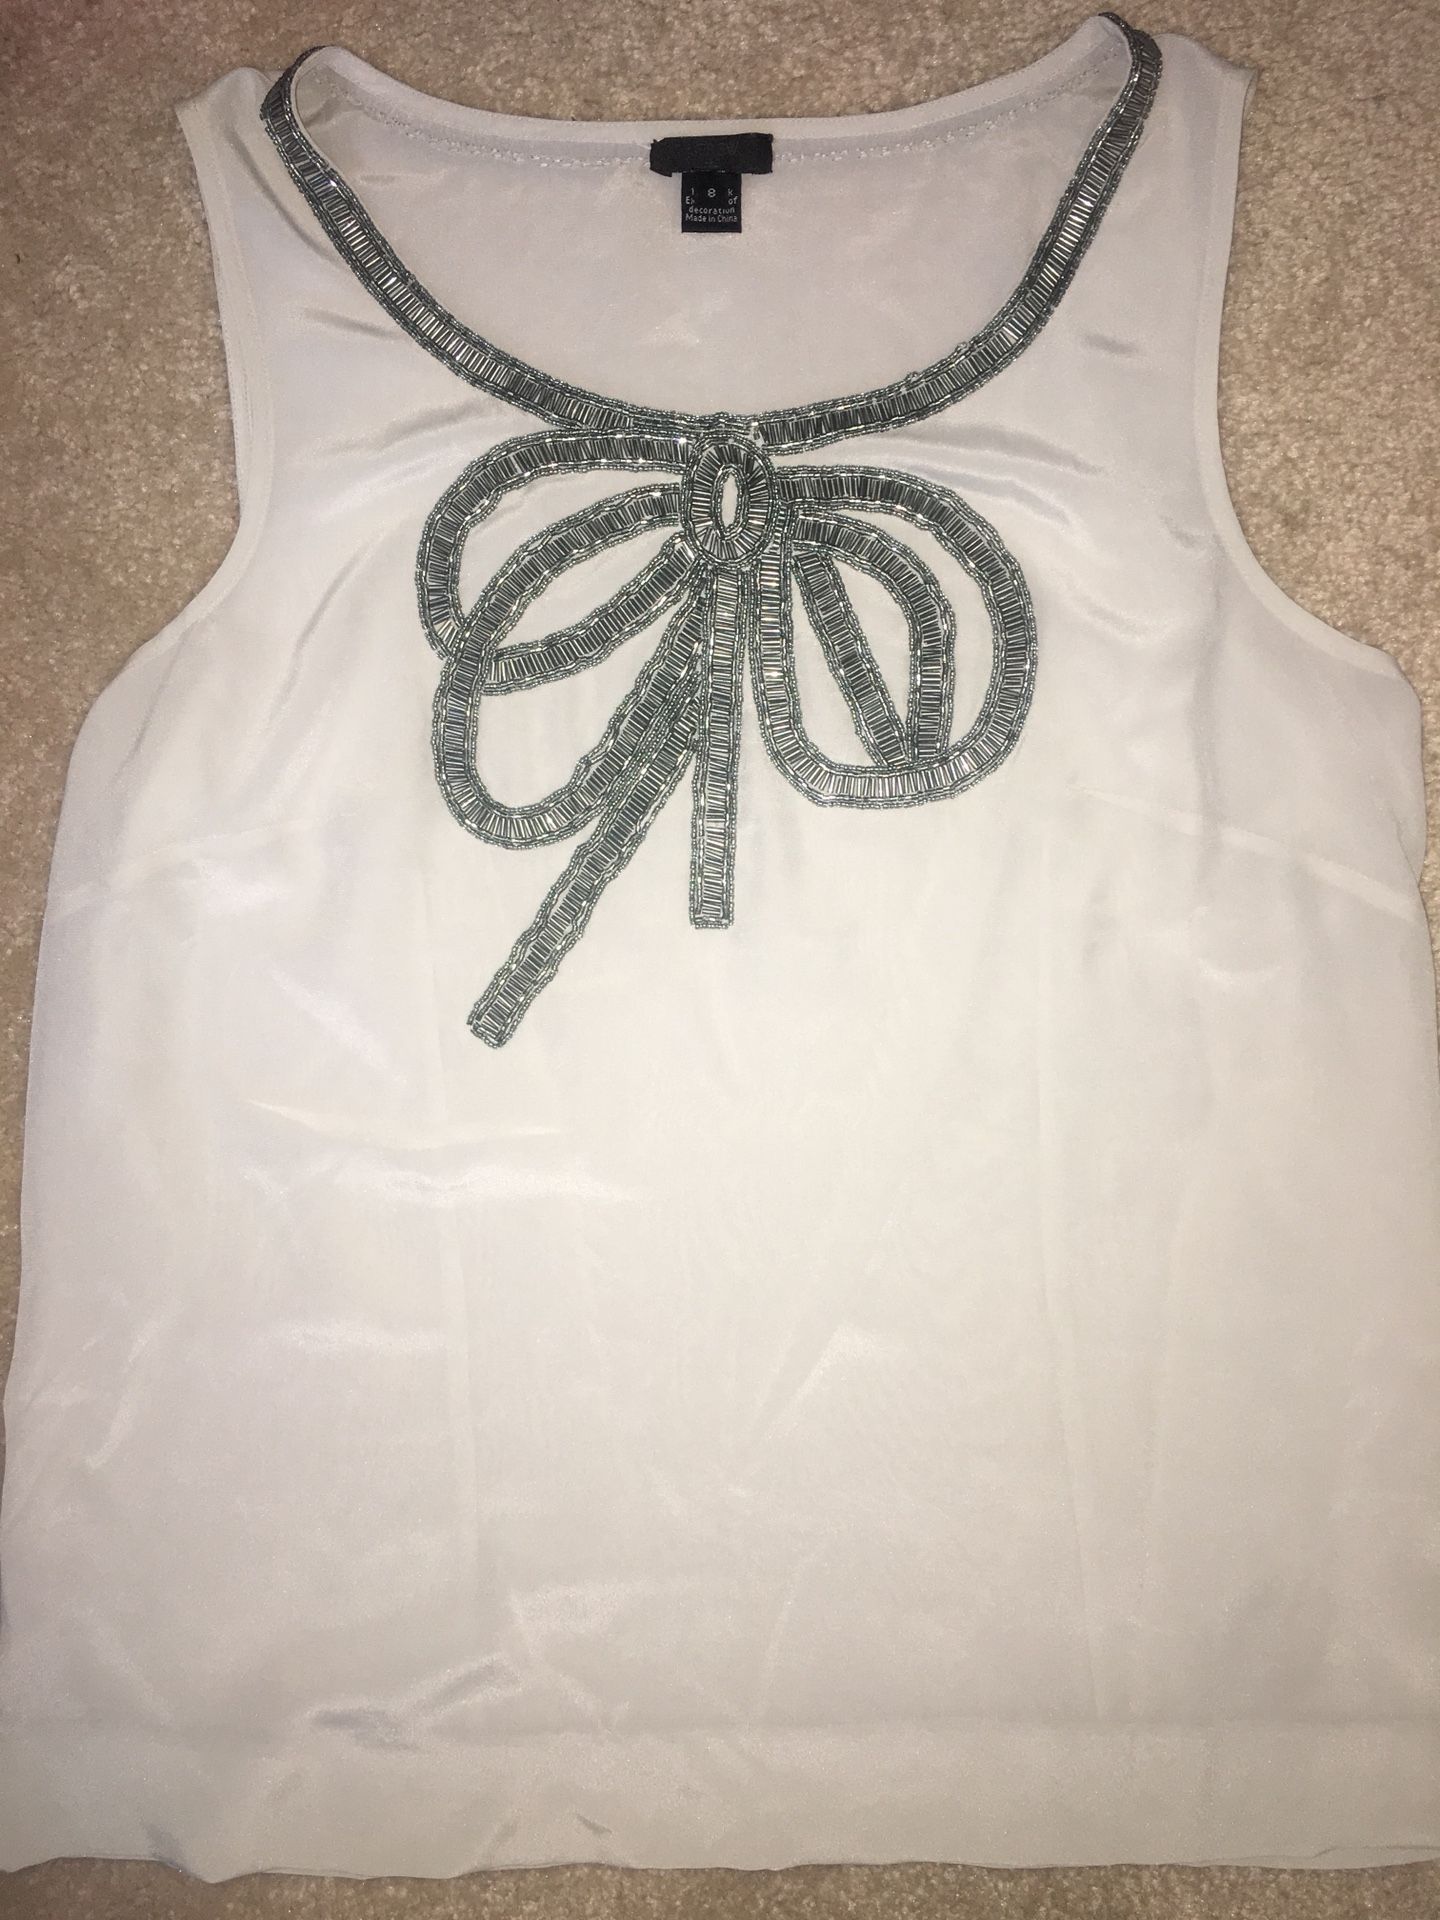 J. Crew embellished Bow Tank Top